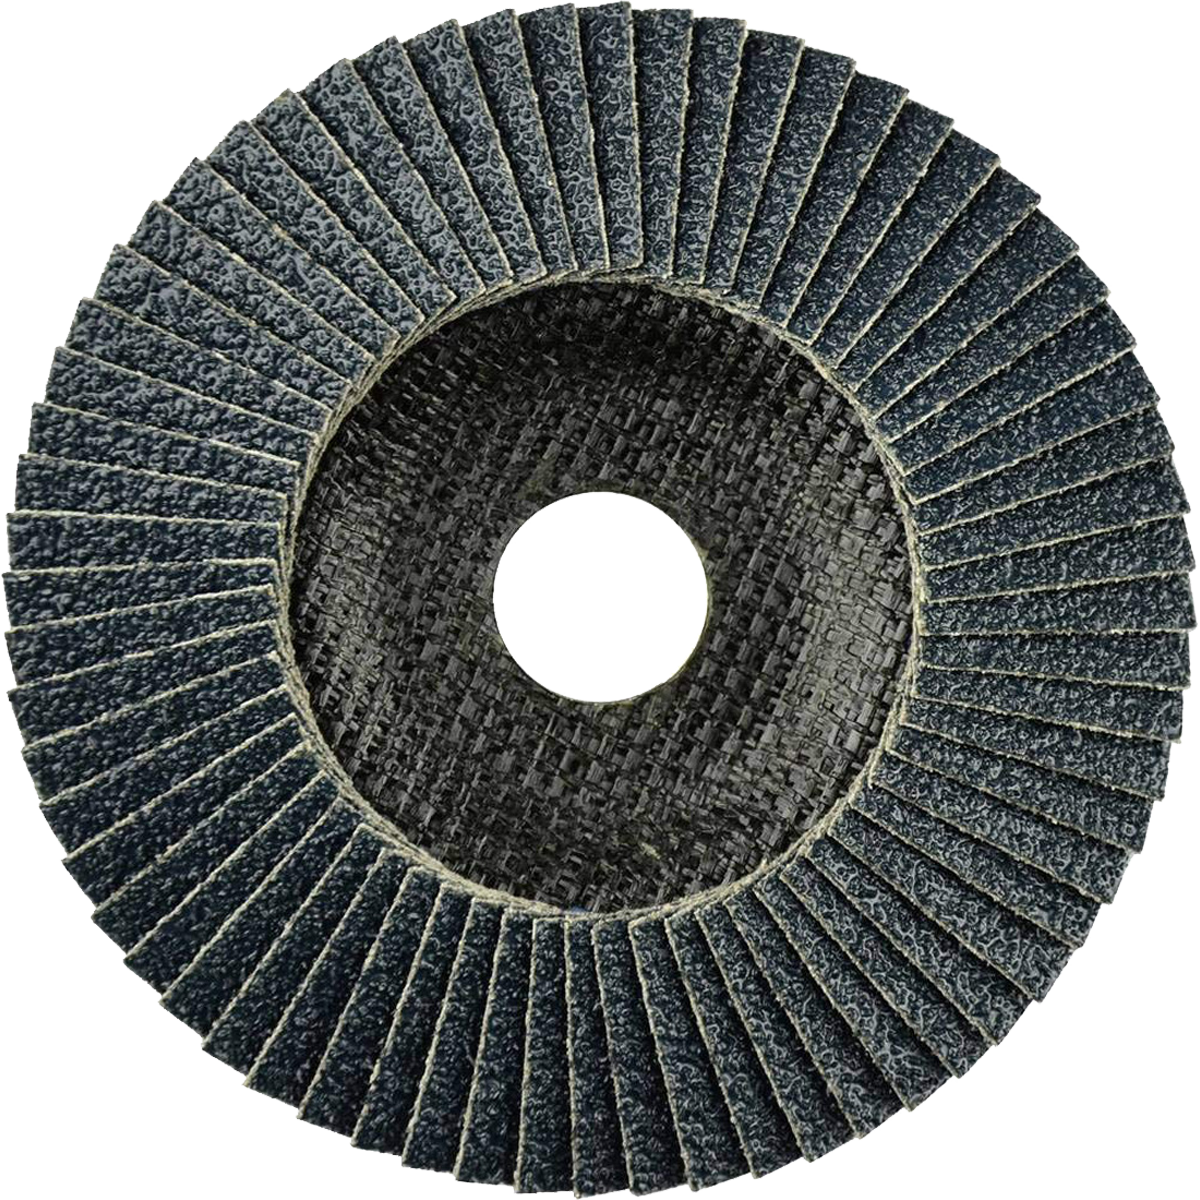 A range of abrasive flap discs that consist of series of of overlapping abrasive flaps for use in contouring and shaping metal.